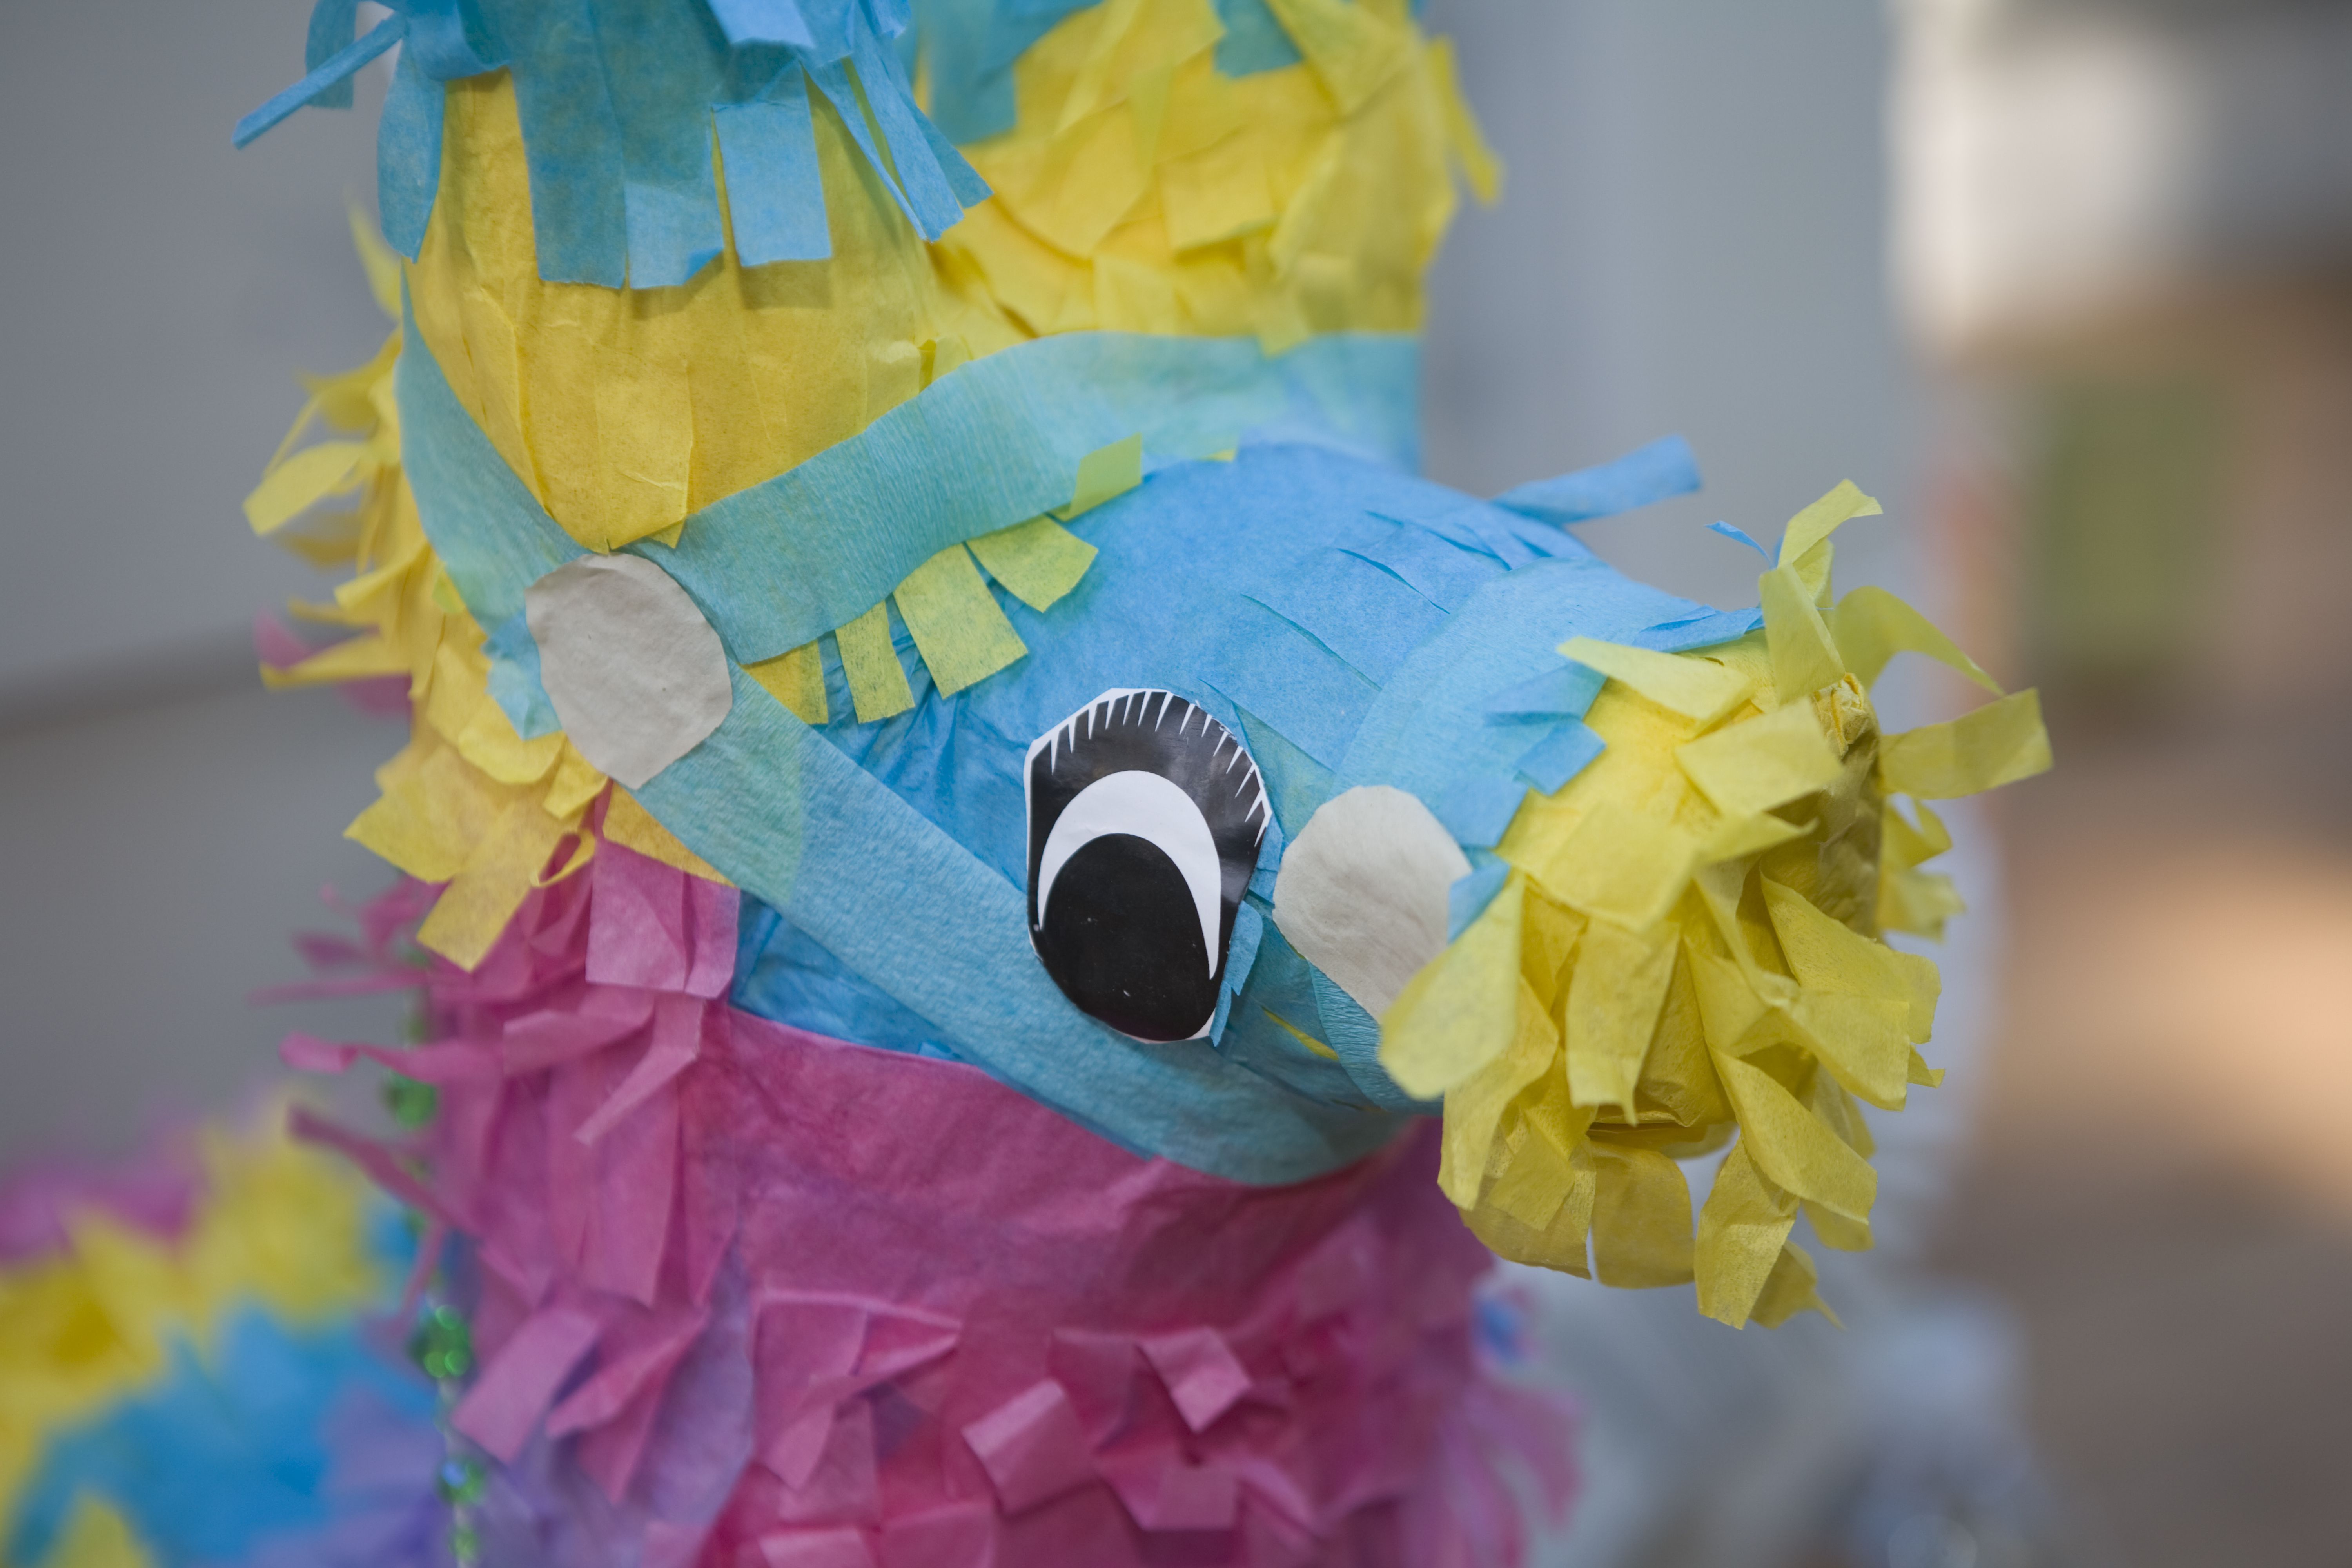 How to Make a Pinata out of Paper Mache